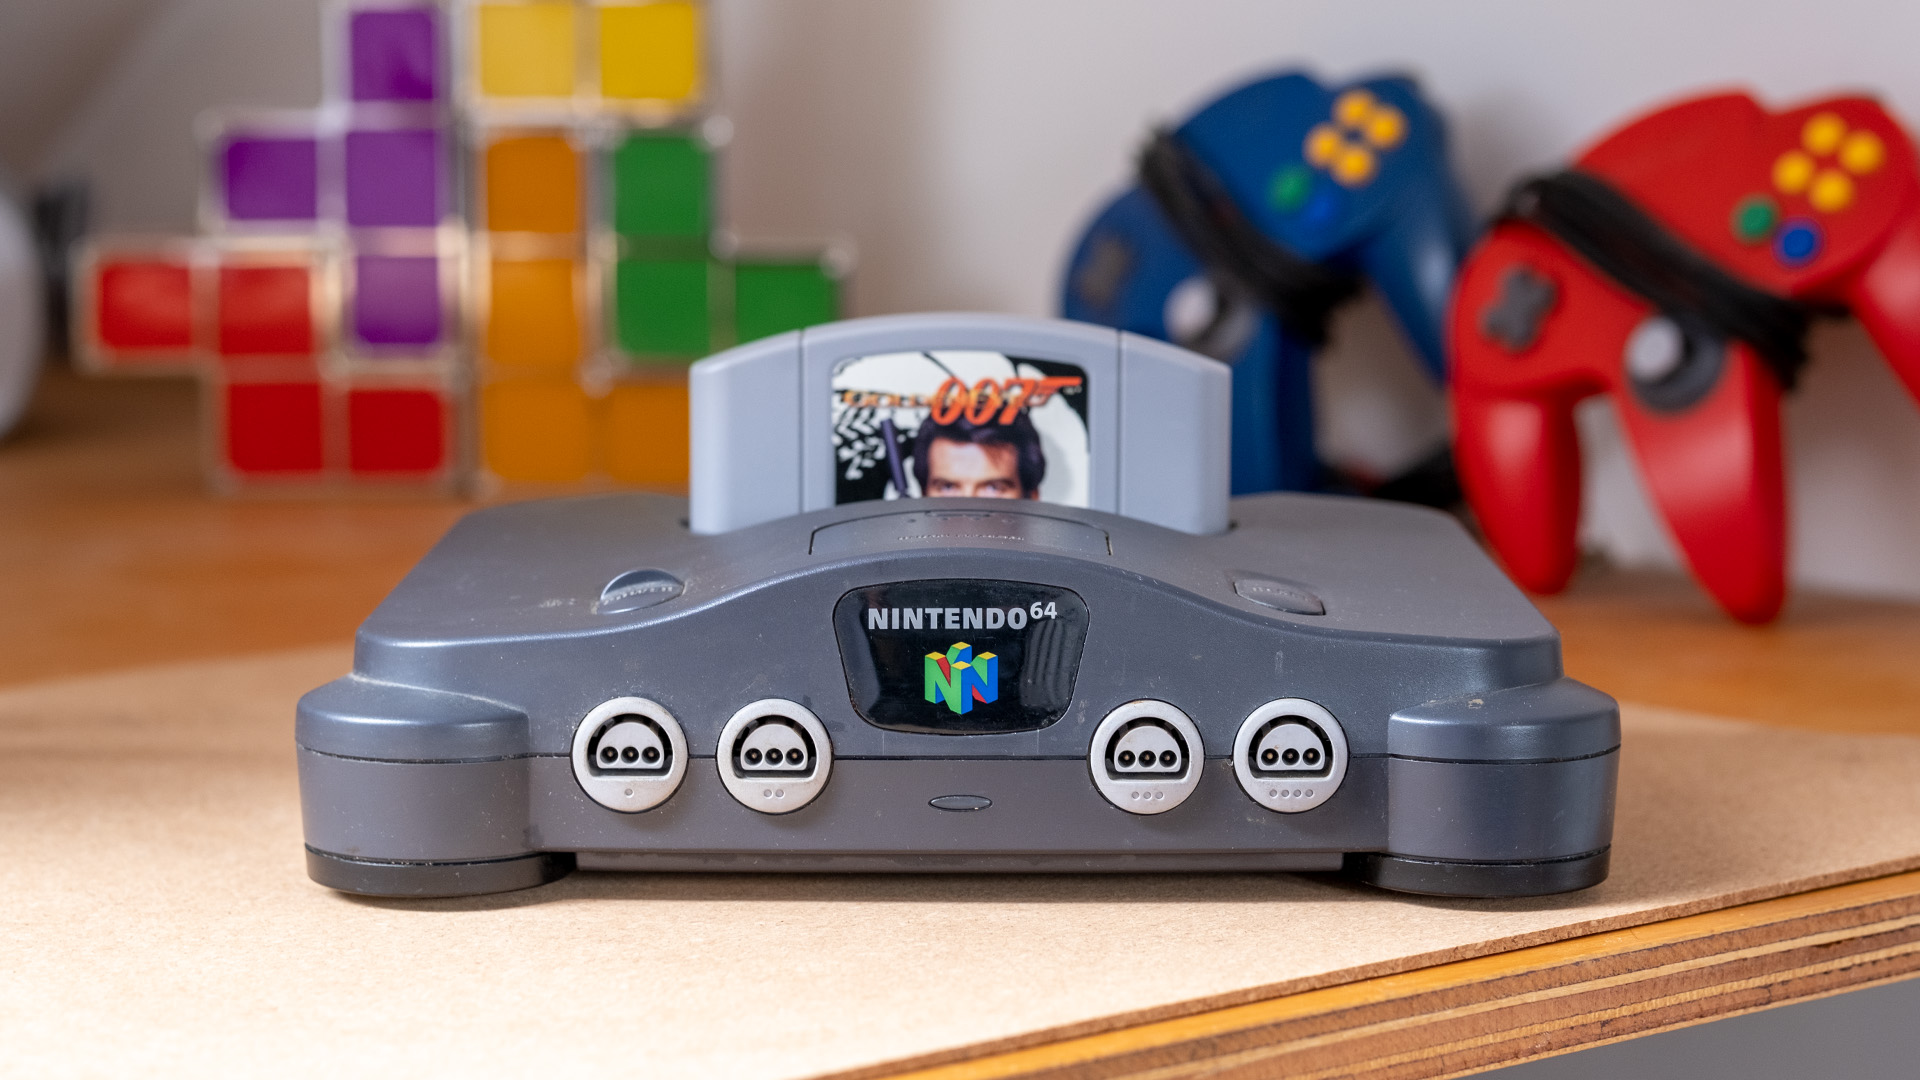 N64 game console in focus